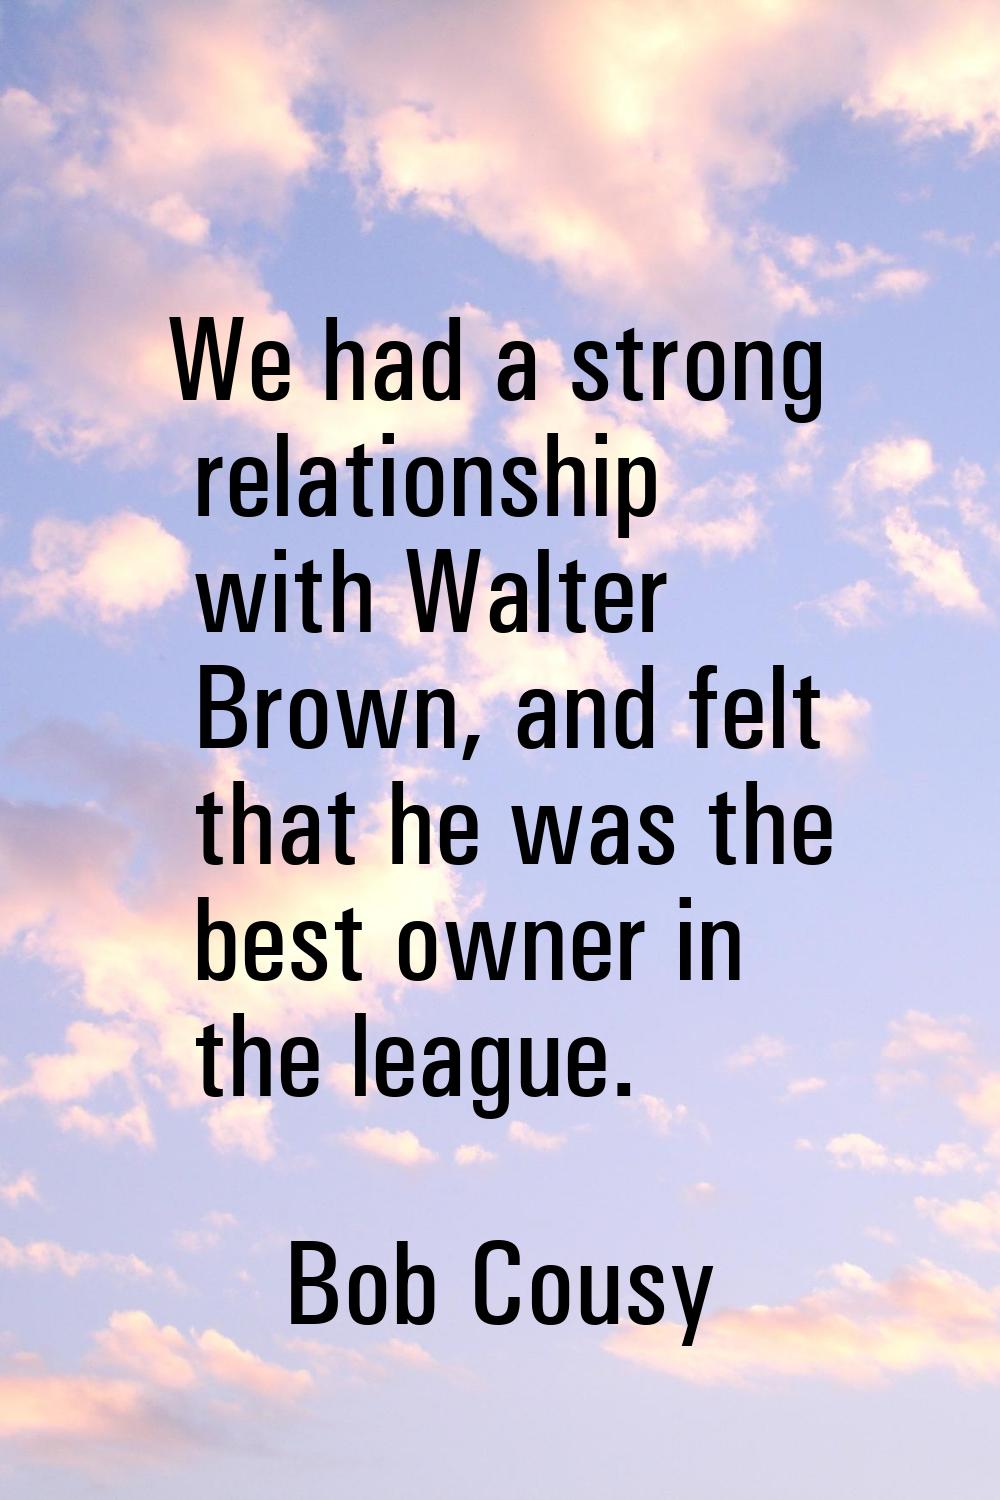 We had a strong relationship with Walter Brown, and felt that he was the best owner in the league.